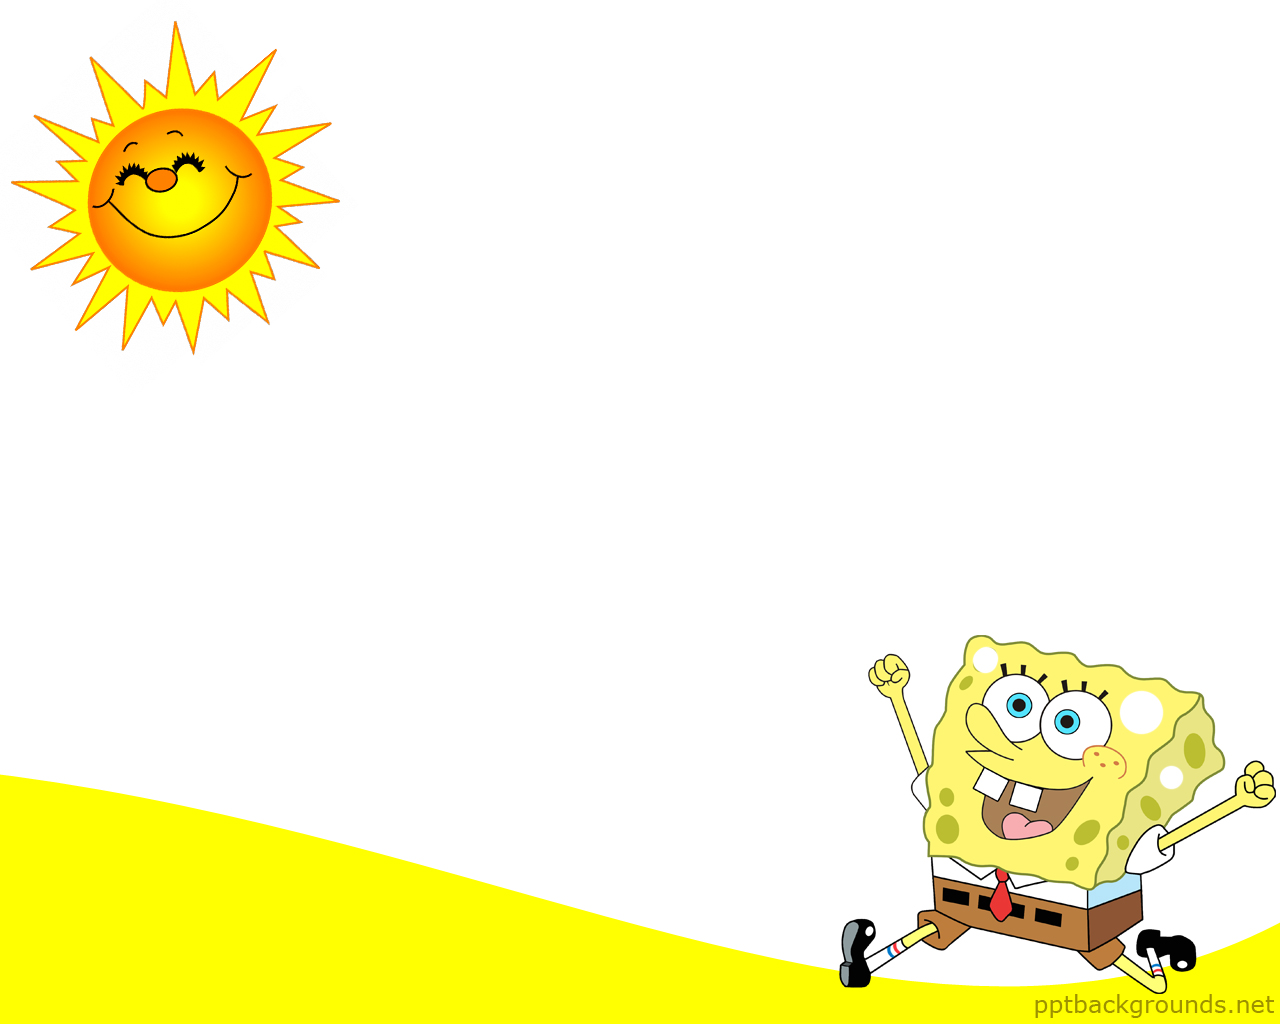 This Is The Spongebob Running In Sun Background Image You Can